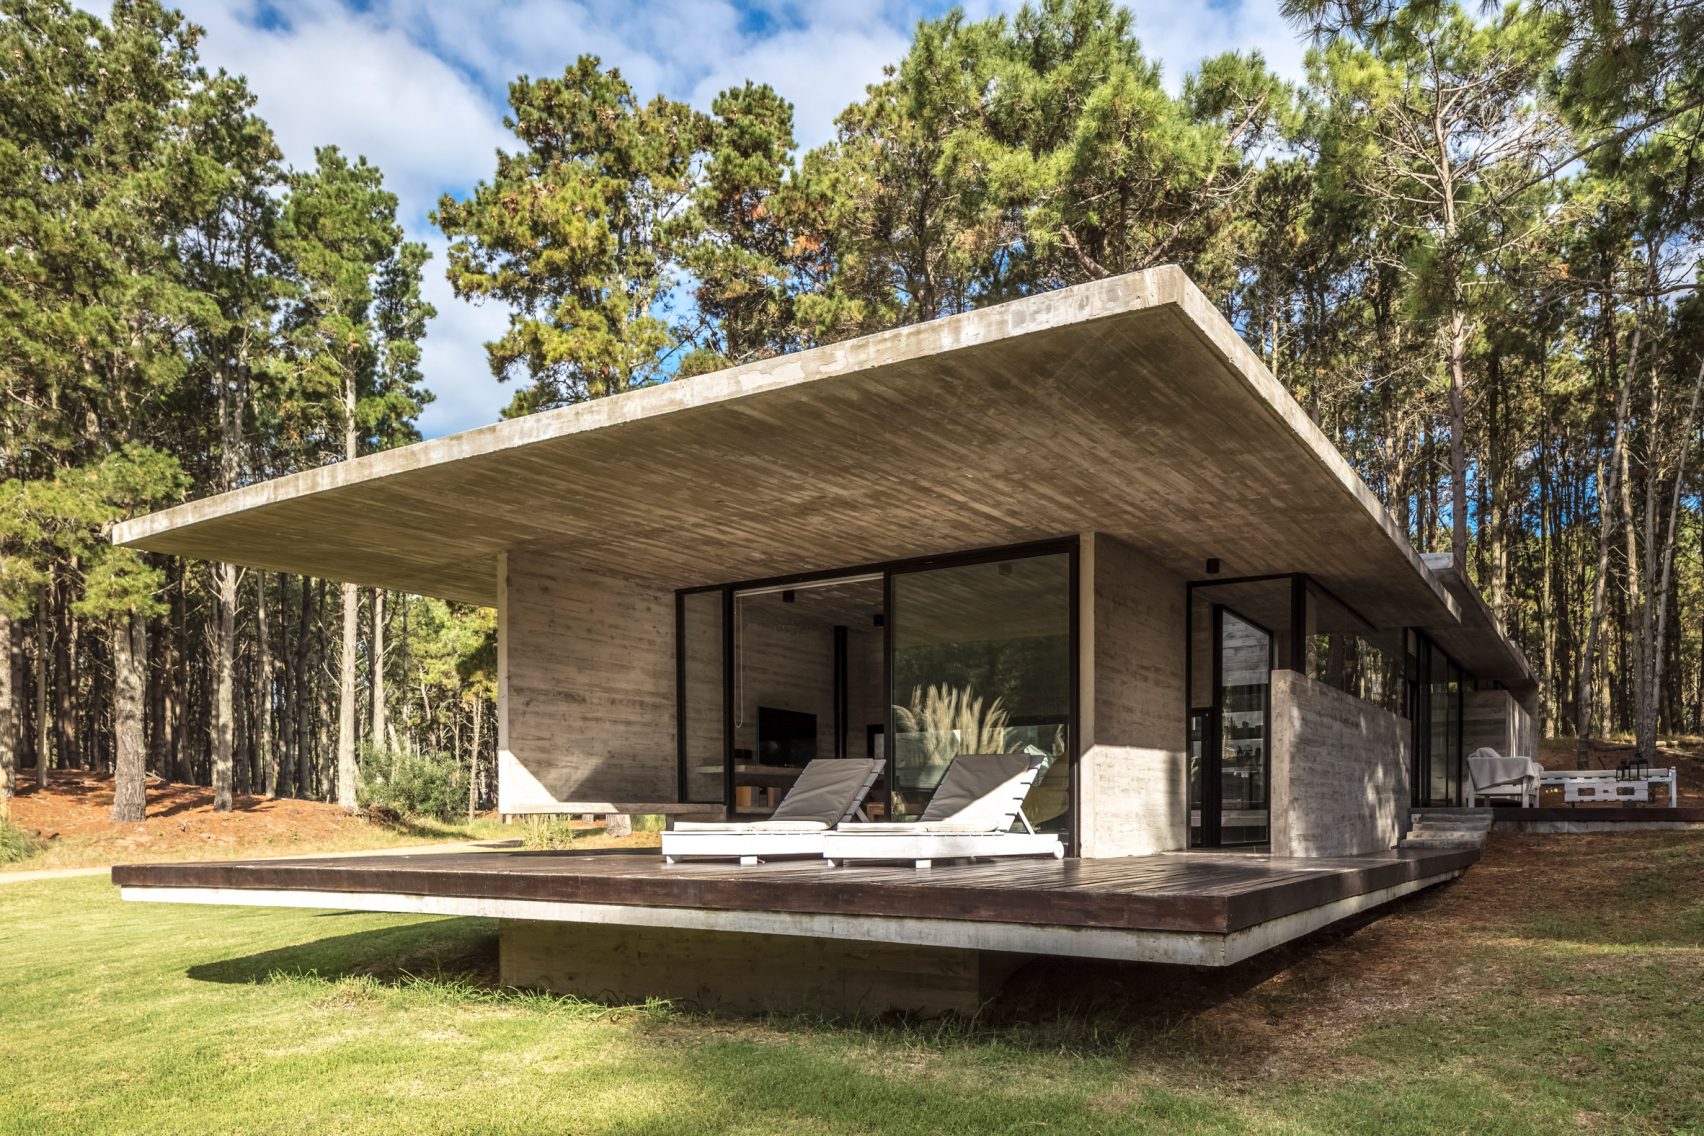 This summer home sits on a slight slope in a clearing among pine and acacia trees and is built from board-formed concrete and large glazed windows. Overhanging concrete slab roofs provide a sense of privacy, while a terrace and a deck lends themselves to